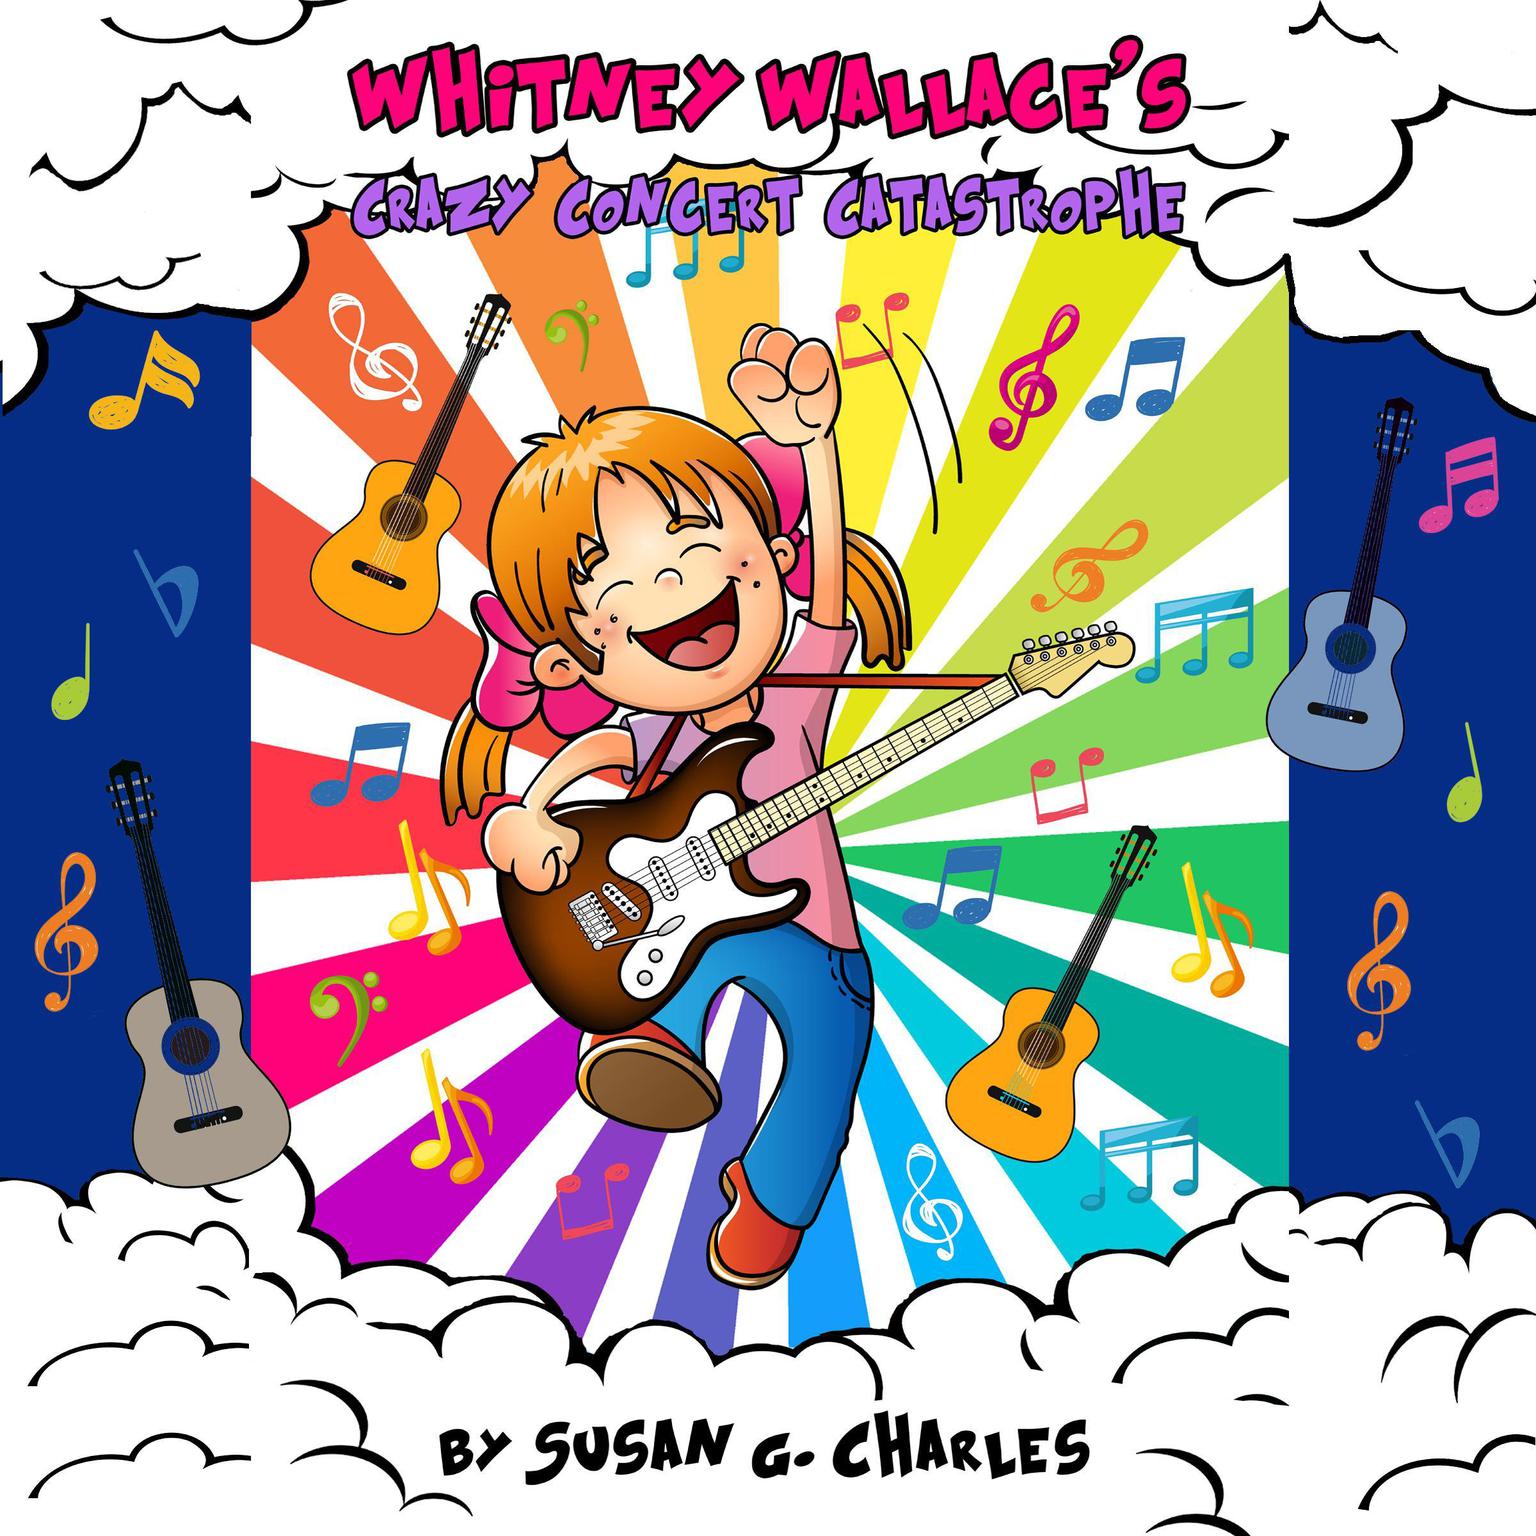 Whitney Wallaces Crazy Concert Catastrophe, Whitney Learns a Lesson, Book 3 Audiobook, by Susan G. Charles